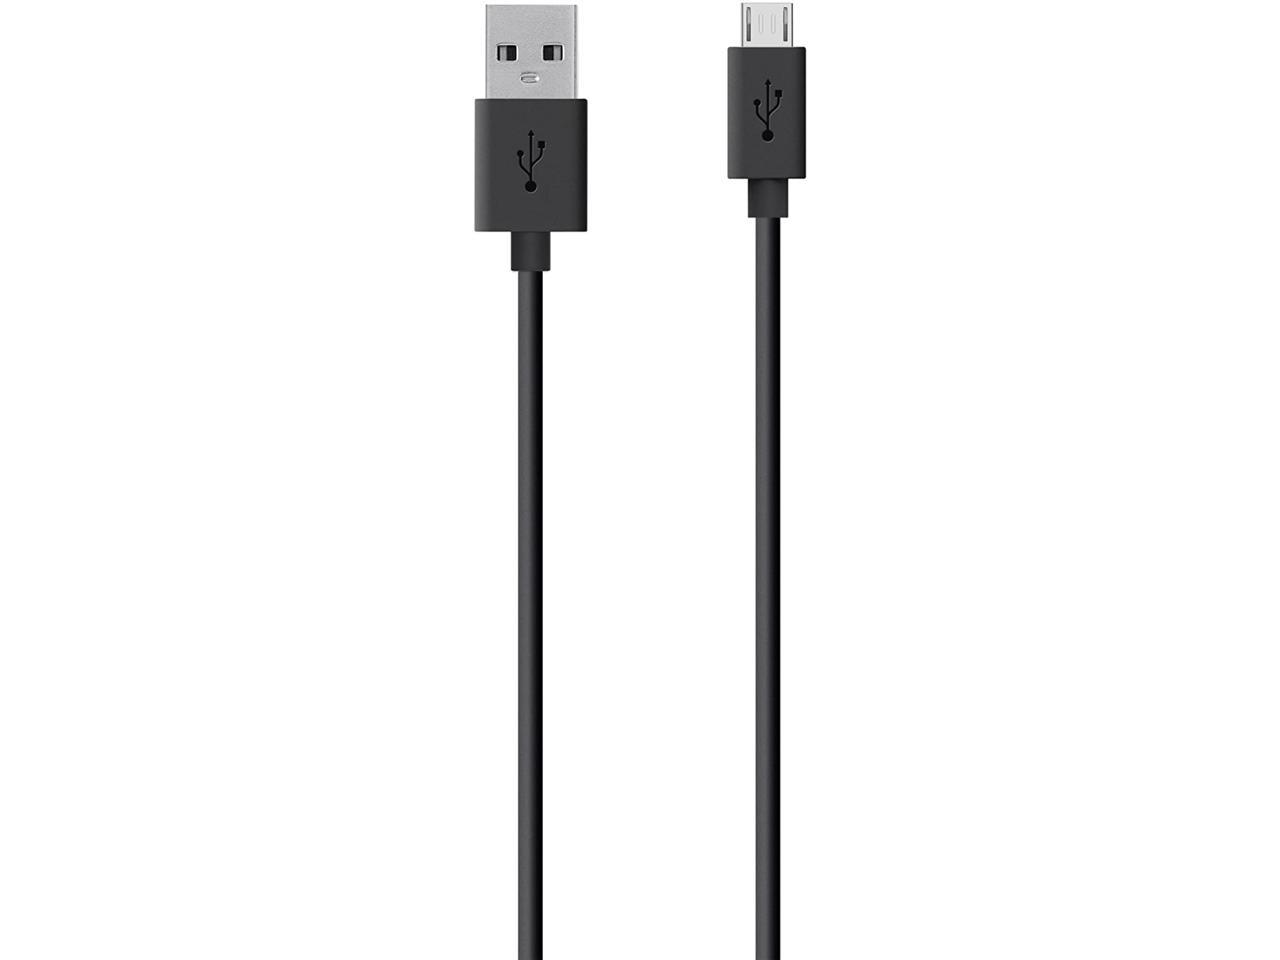 Belkin MIXIT? Micro USB ChargeSync Cable F2CU012bt3M-BLK - image 5 of 11